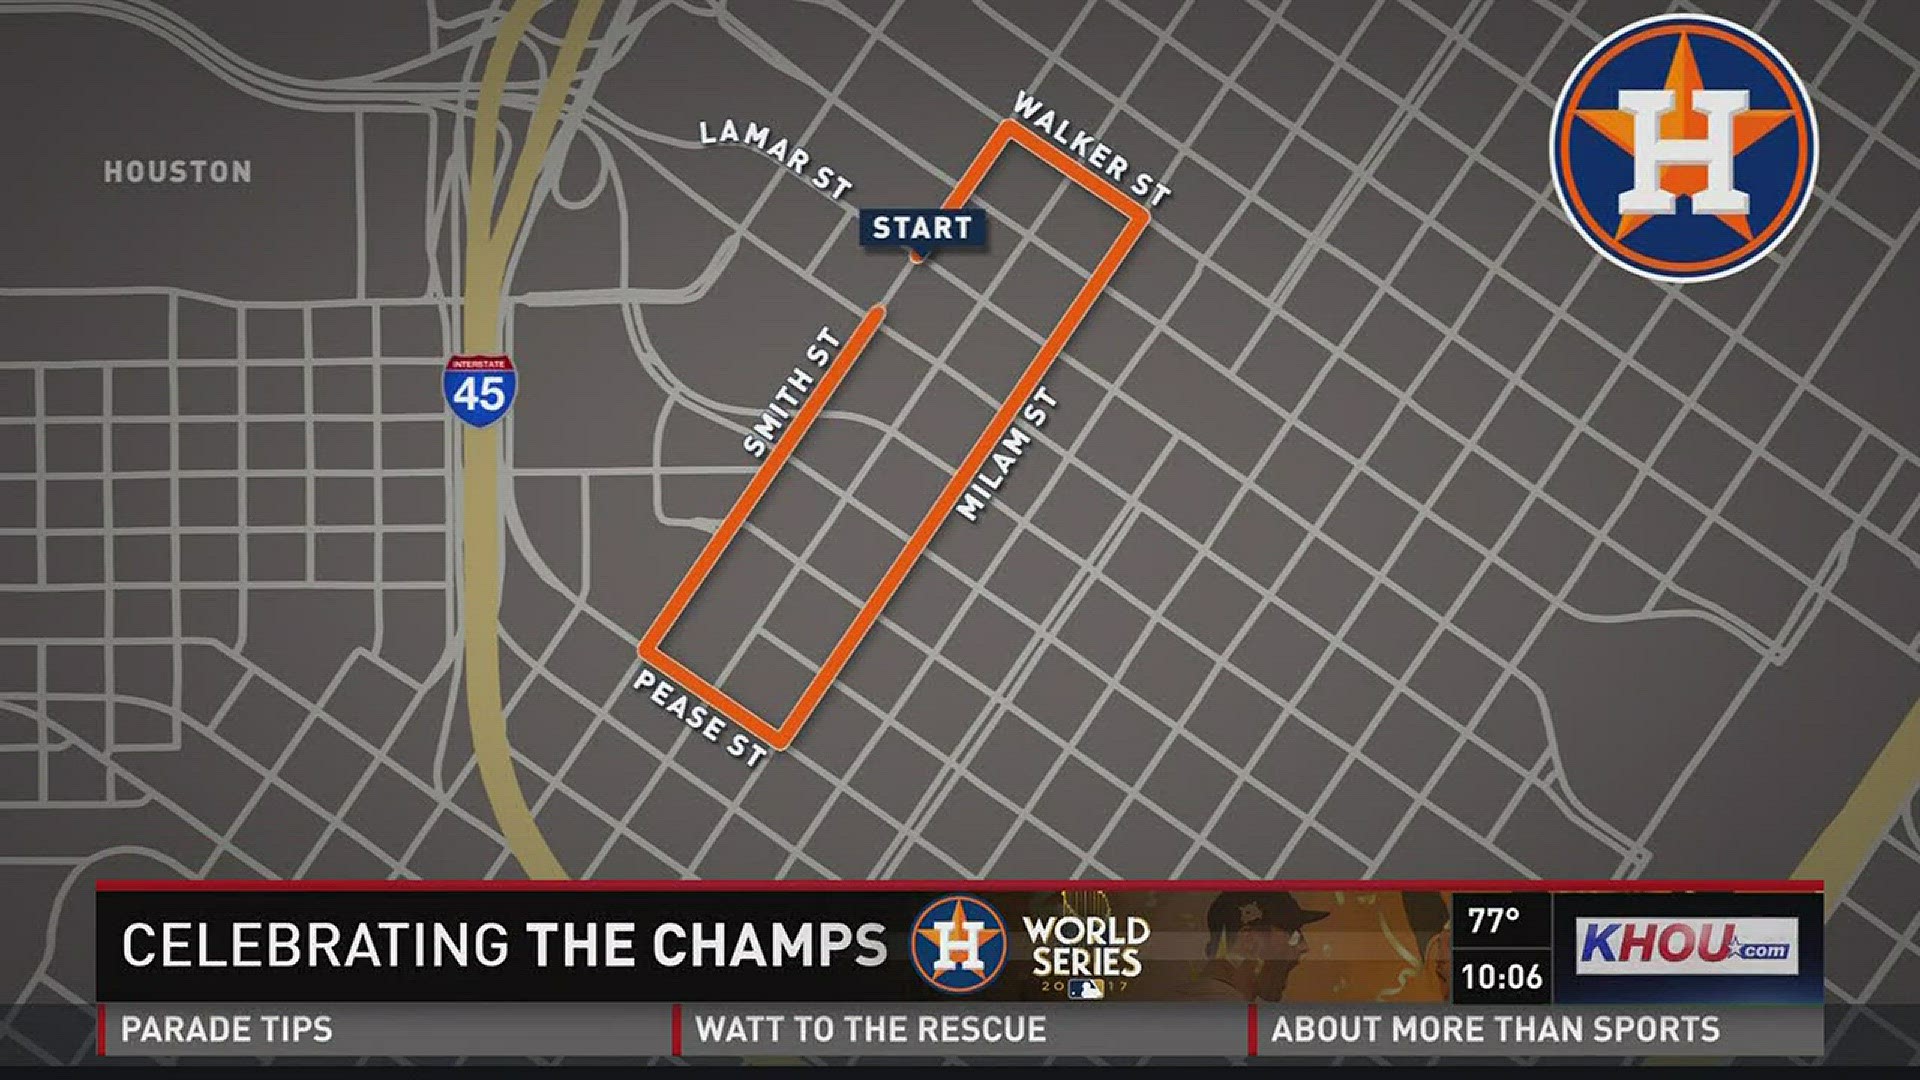 KHOU 11 reporter Brett Buffington has what you need to know about the Astros parade and celebration Friday afternoon.